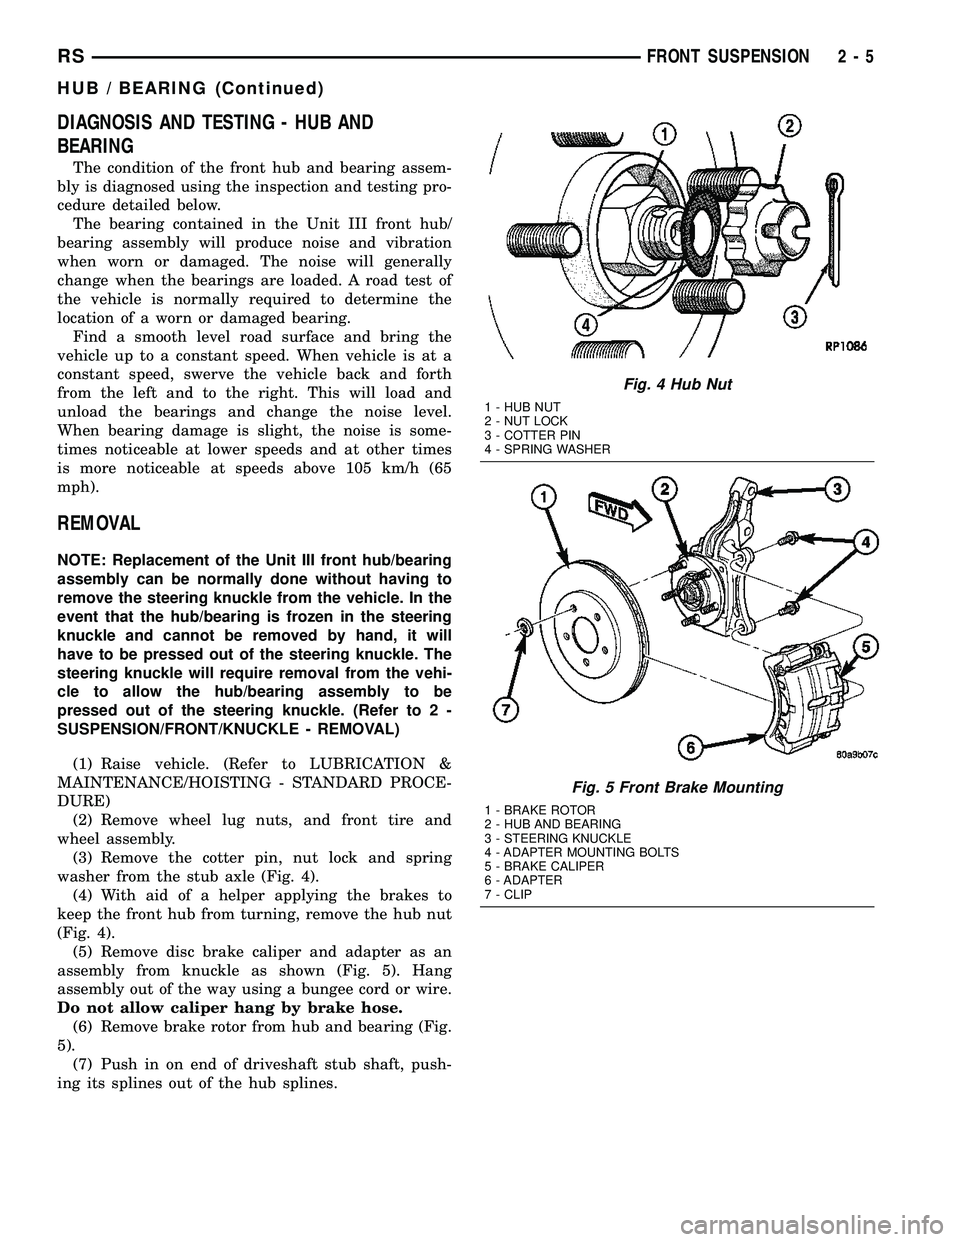 CHRYSLER VOYAGER 2004  Service Manual DIAGNOSIS AND TESTING - HUB AND
BEARING
The condition of the front hub and bearing assem-
bly is diagnosed using the inspection and testing pro-
cedure detailed below.
The bearing contained in the Uni